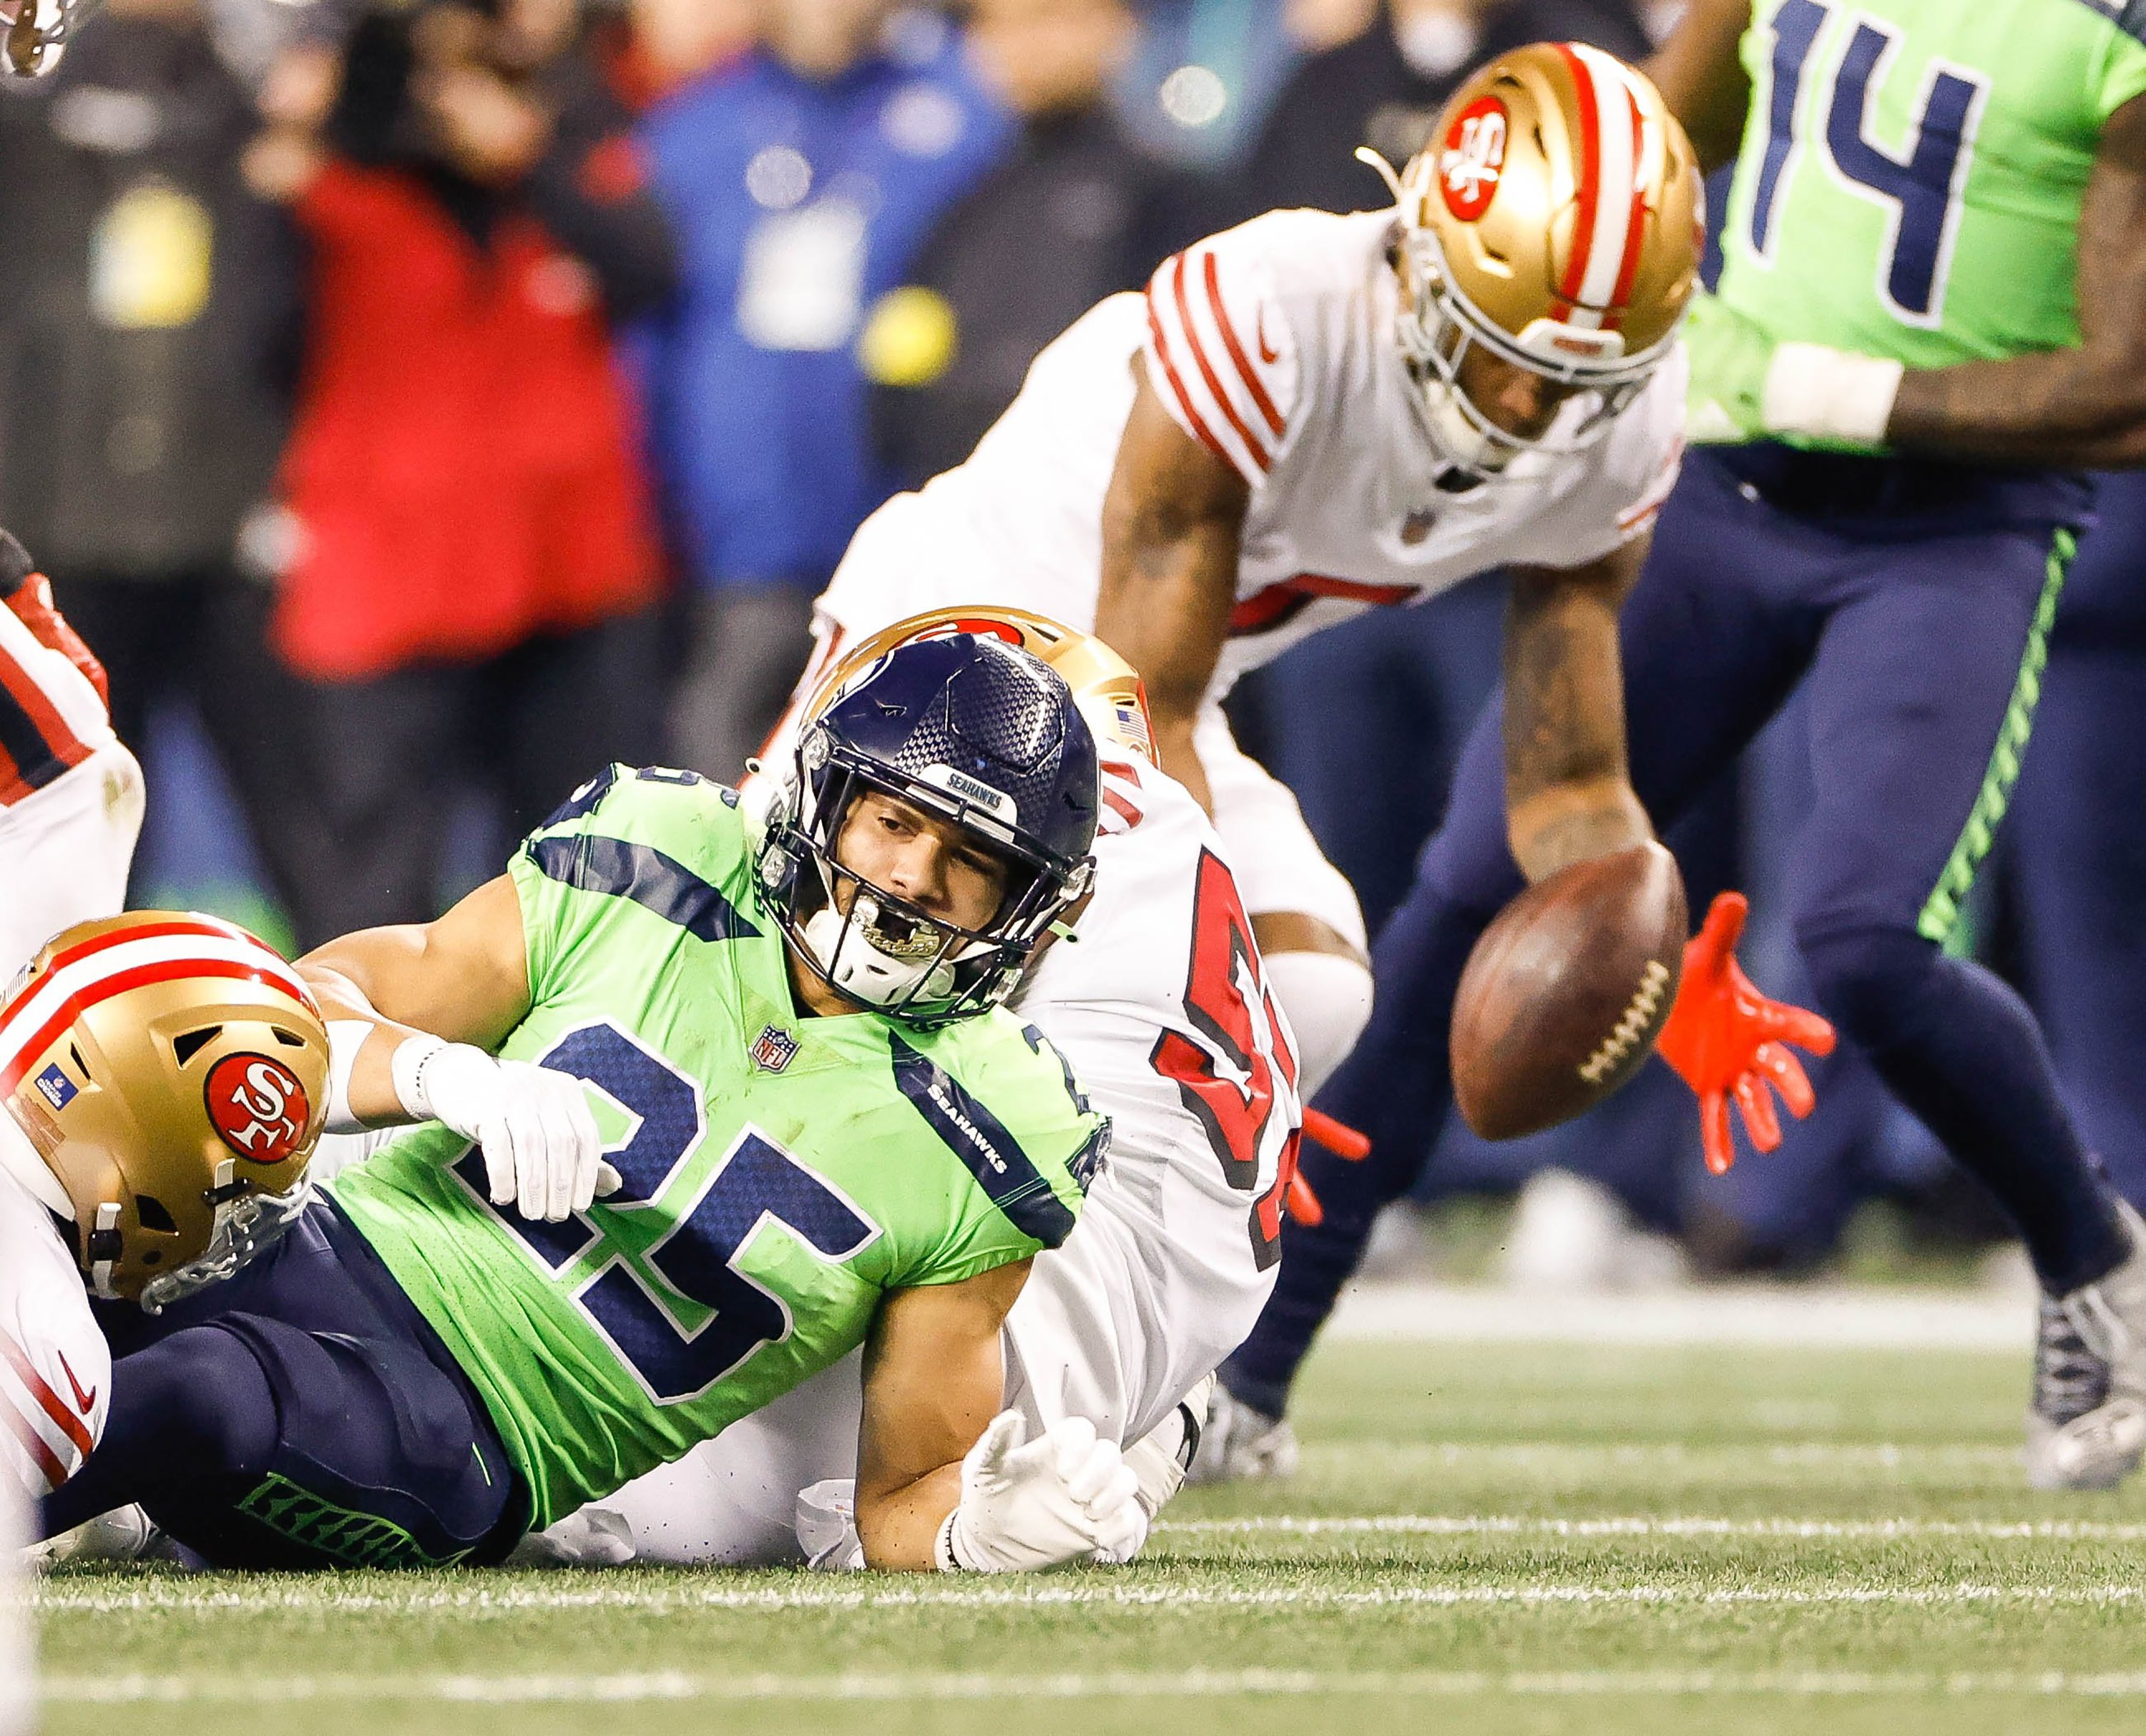 Grading the Seahawks in their 41-23 loss to the 49ers